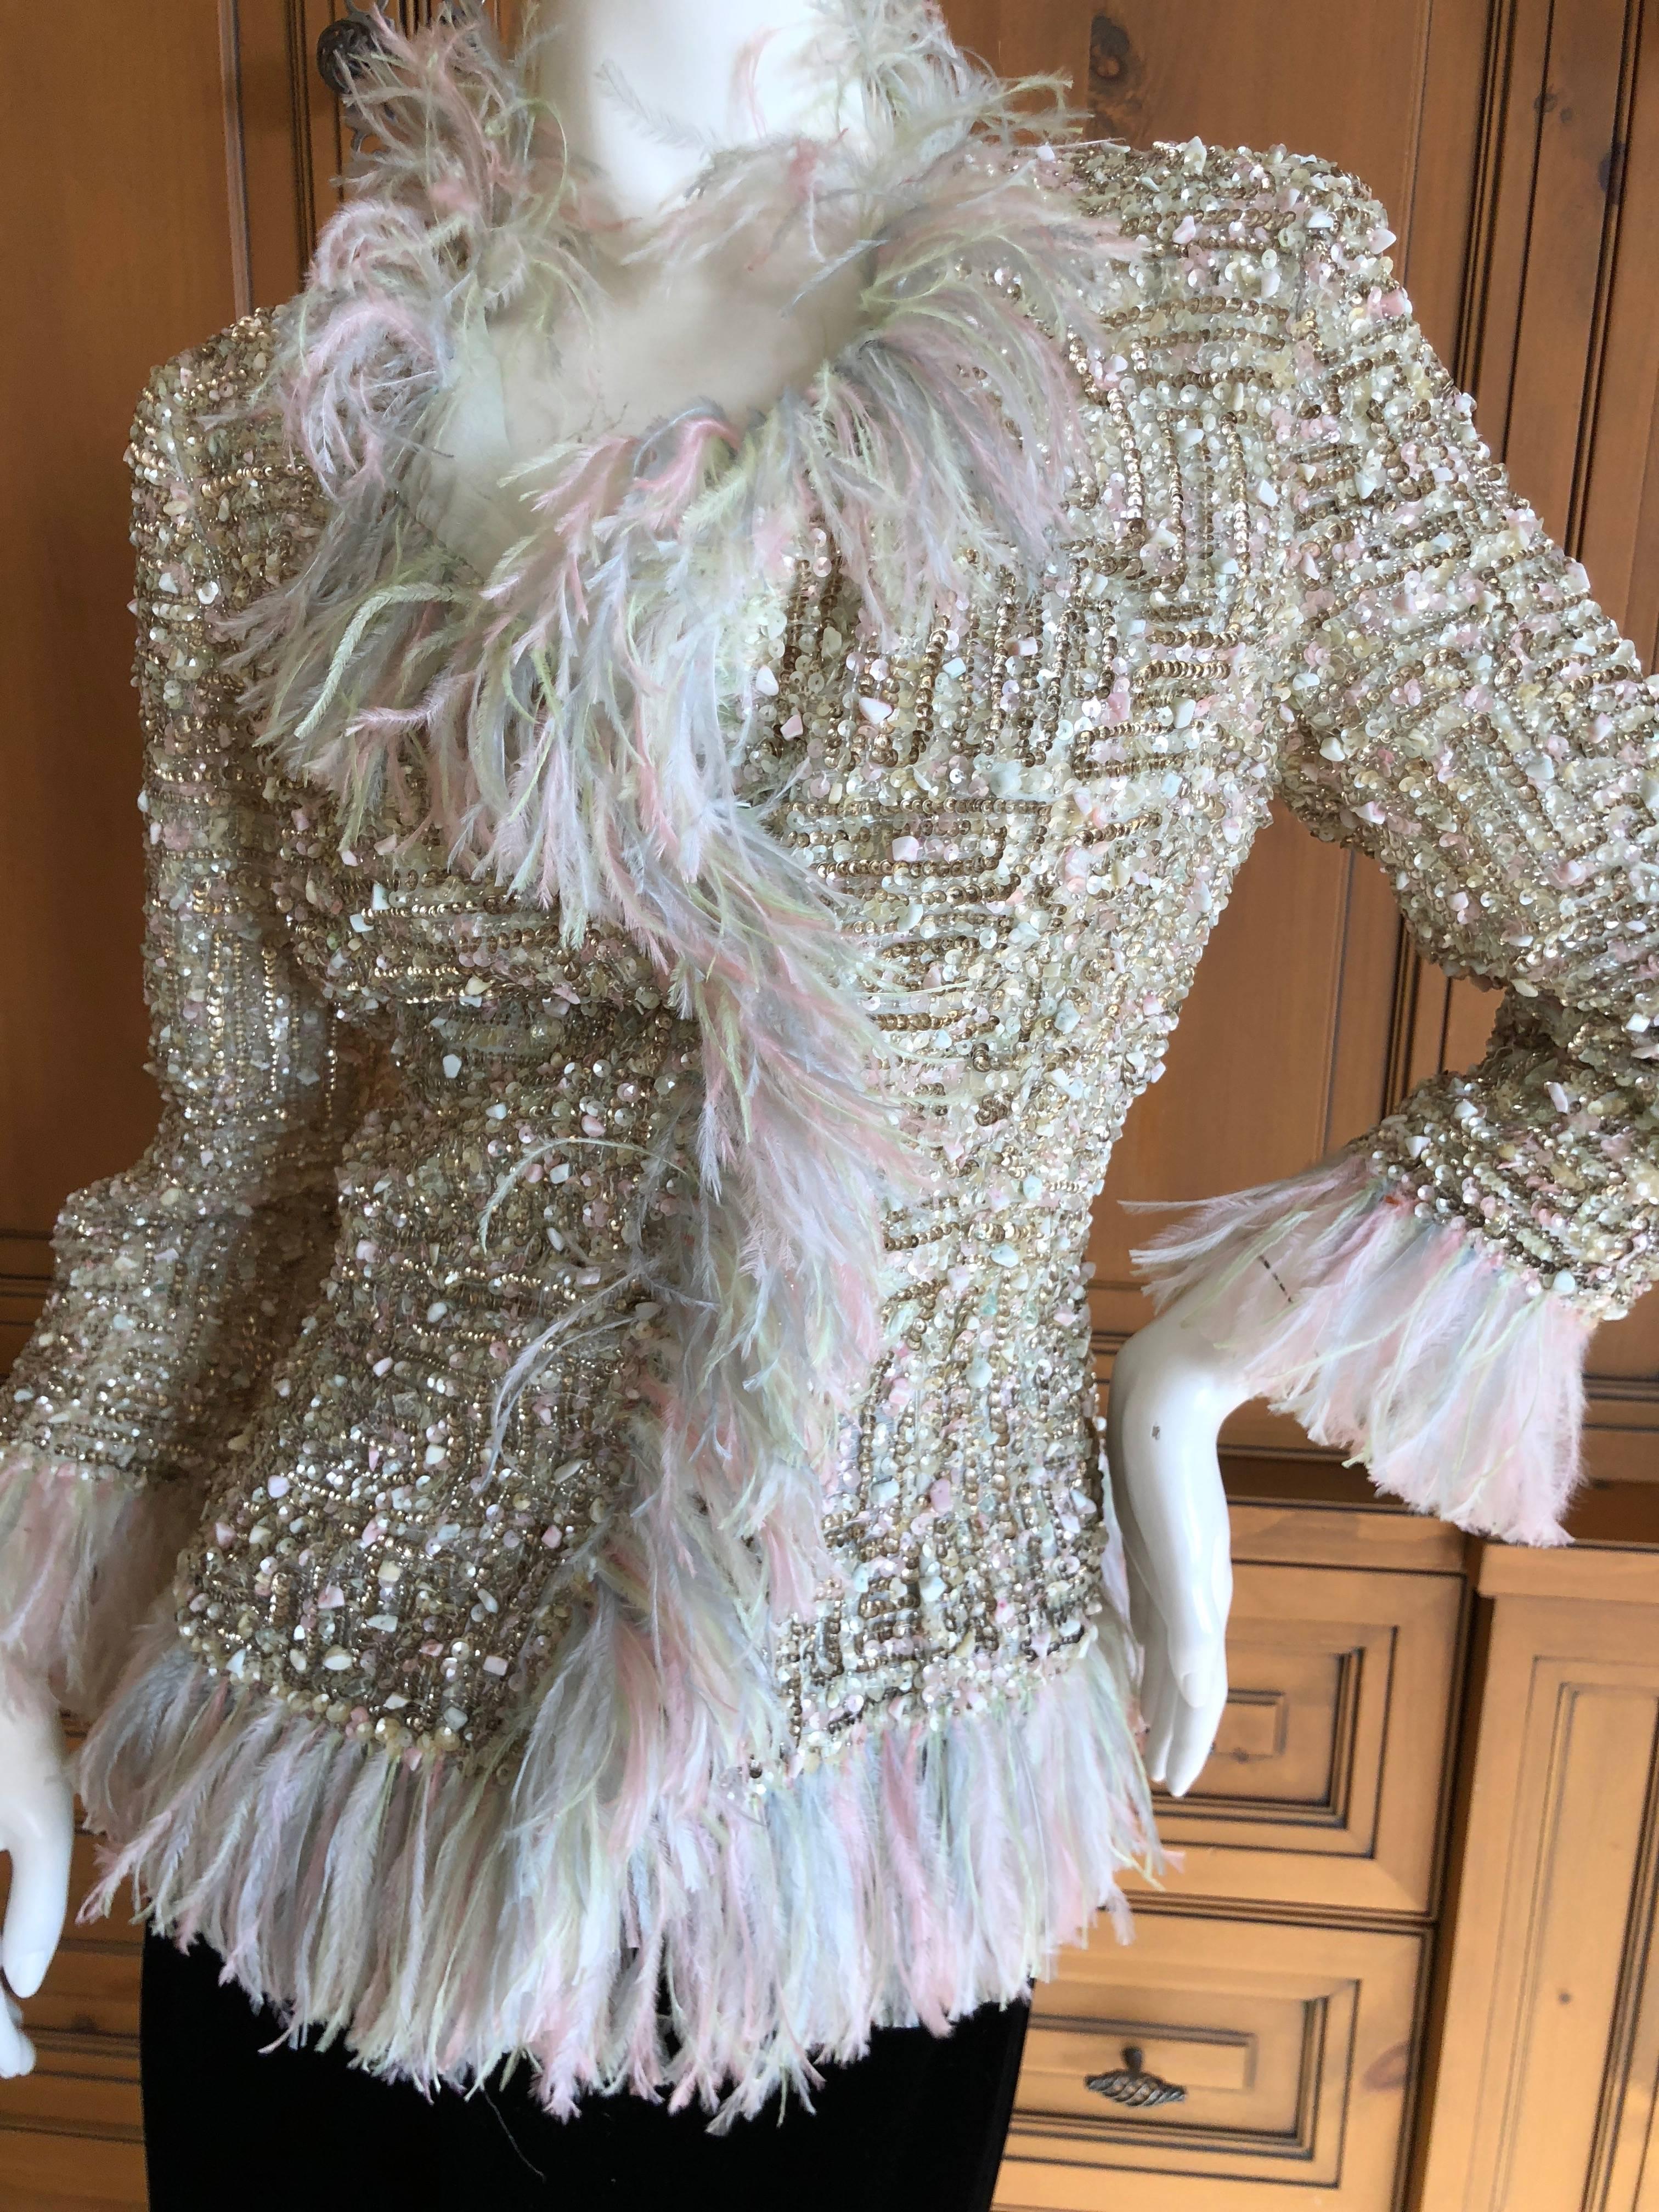 Oscar de la Renta Vintage Sequin Embellished Ostrich Feather Trim Evening Jacket.
Please use zoom feature to see the incredible details.
Simply Scrumptious
 Size 8
Bust 38